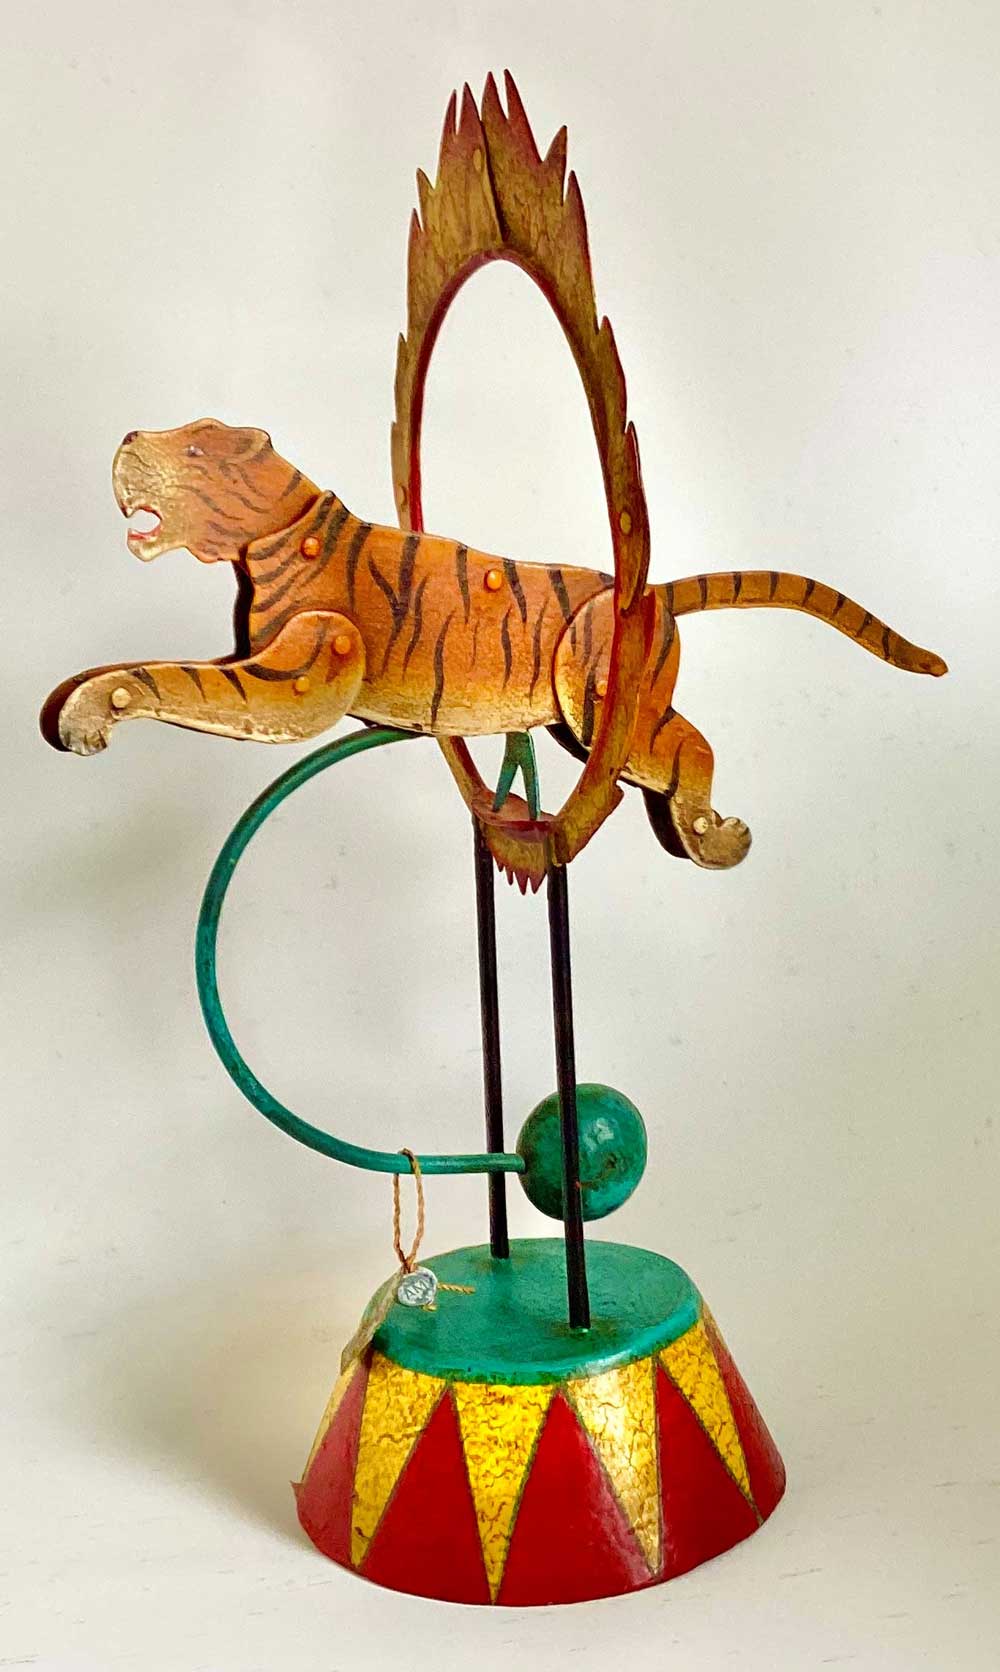 Photo: Moving tiger figure jumping through a flaming hoop